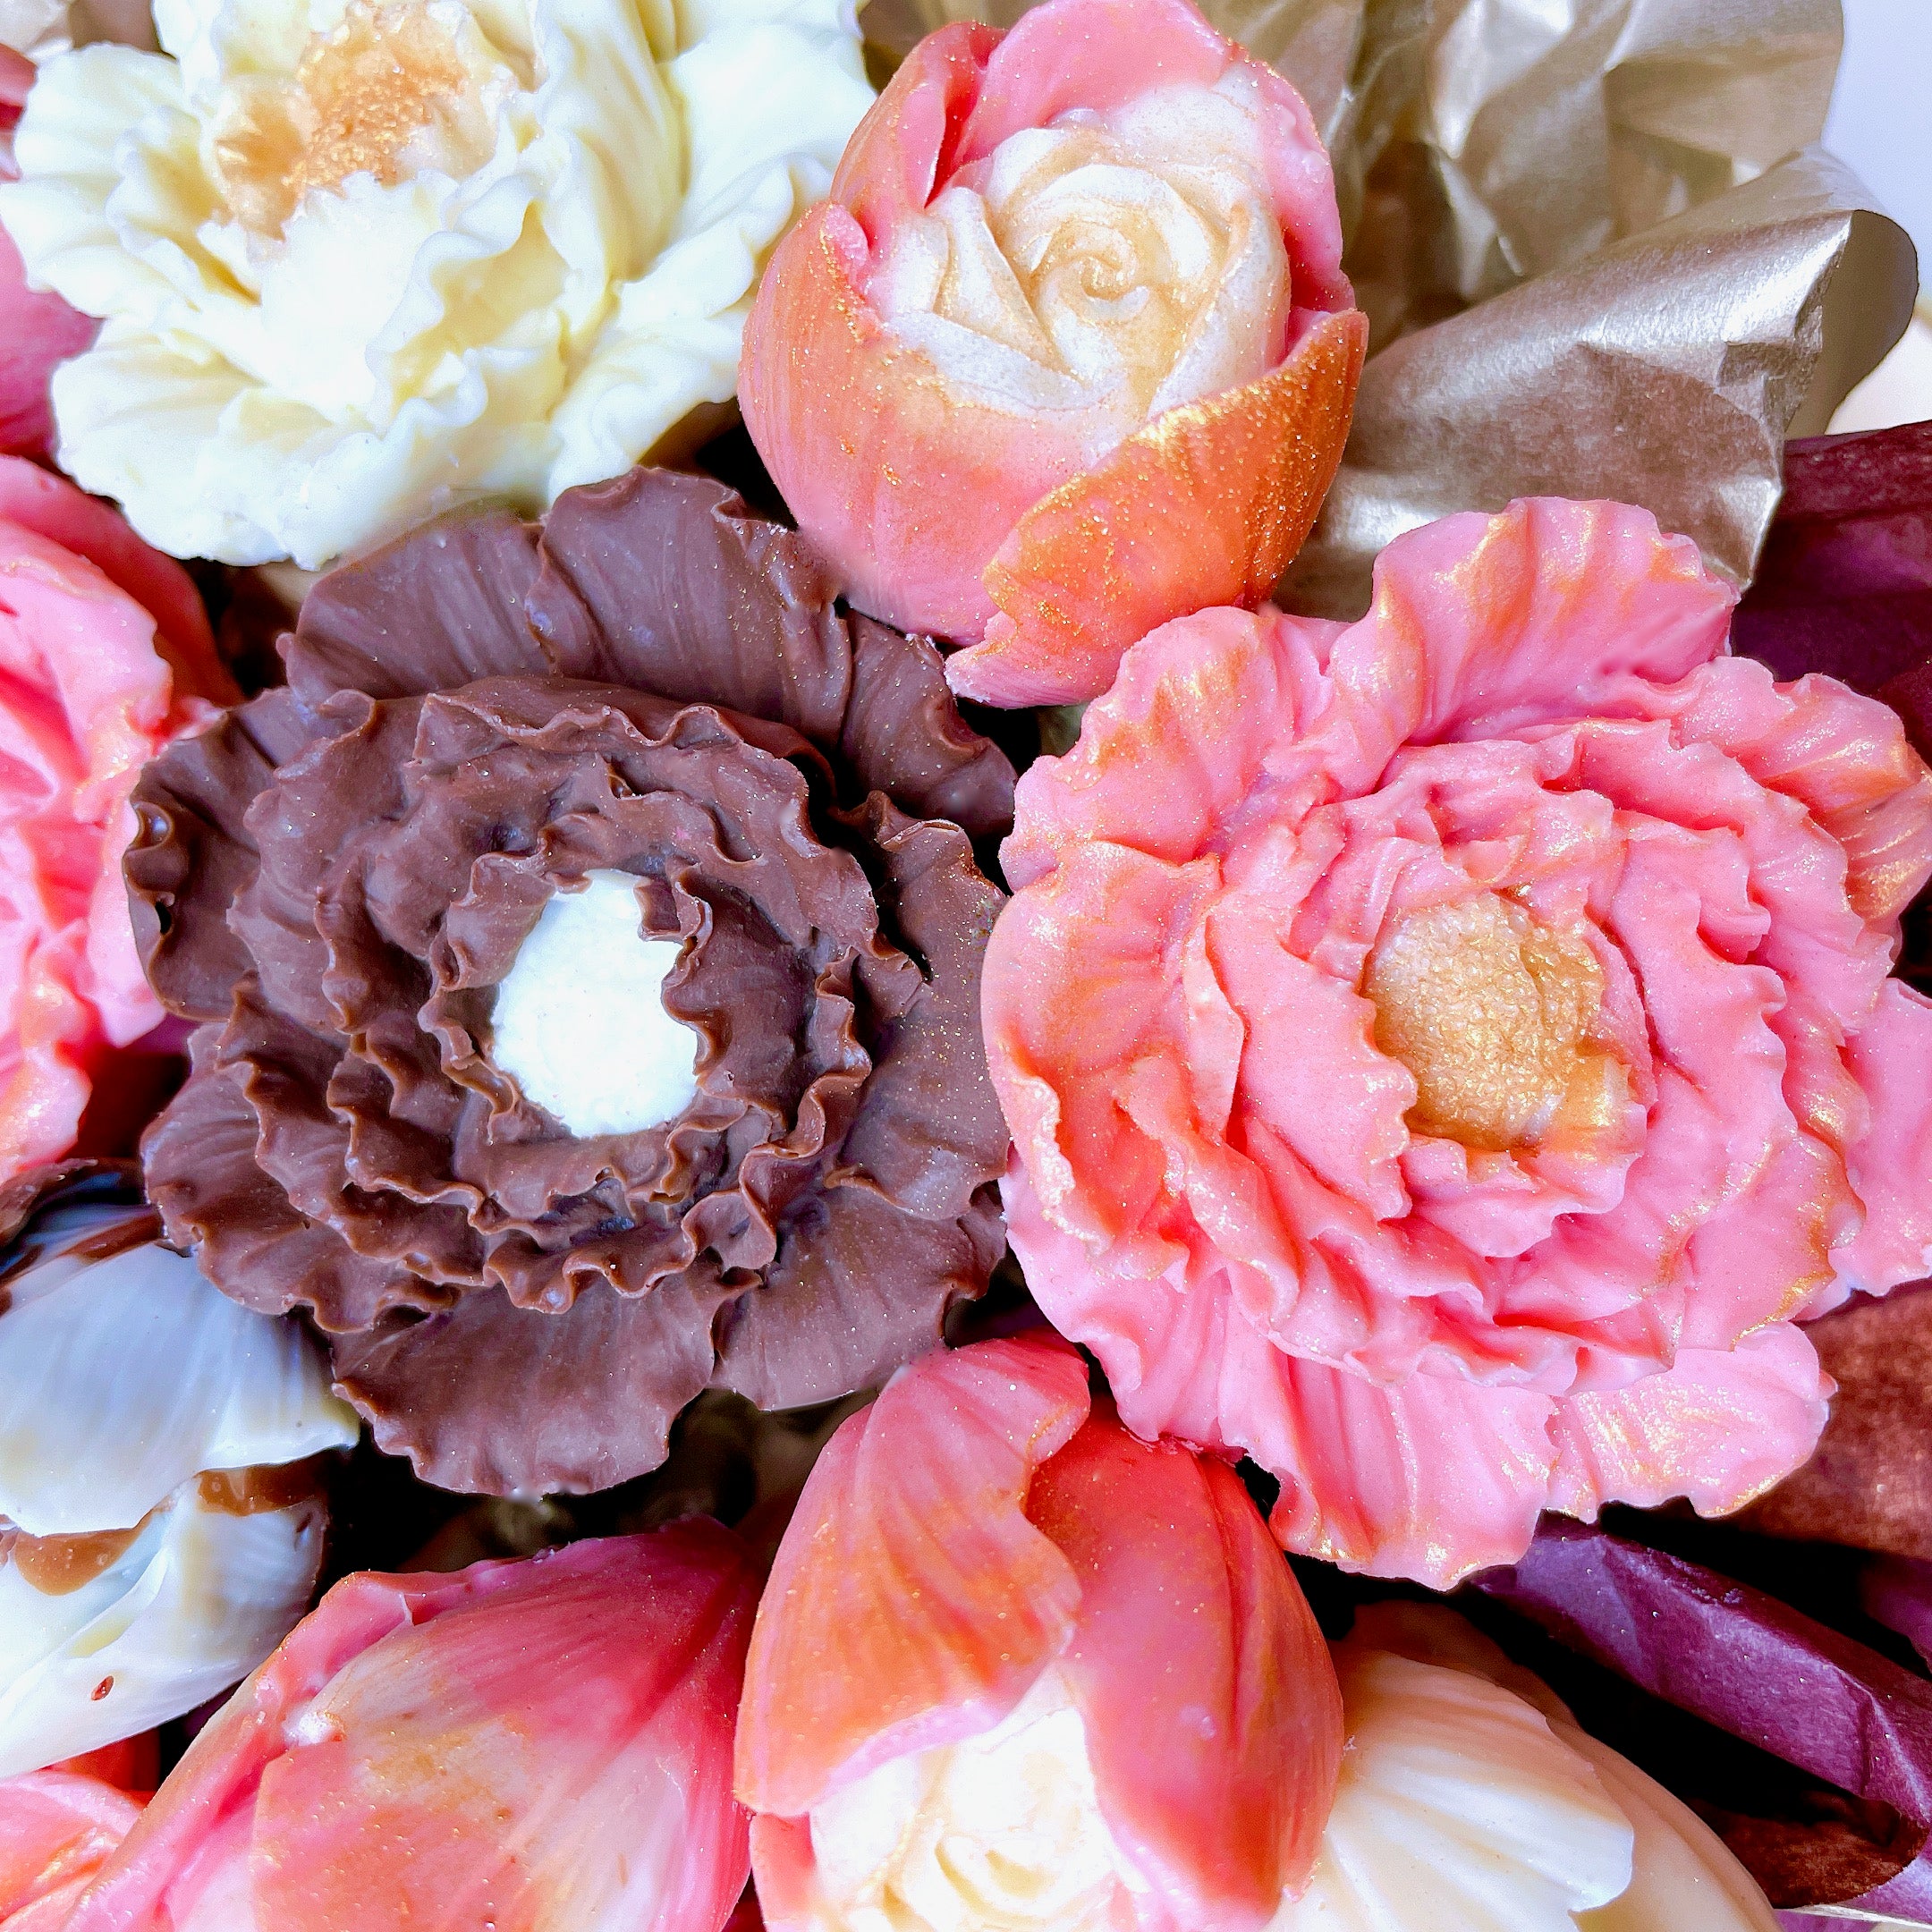 Chocolate roses, chocolate flowers bouquet, chocolate blooms, pink edible bouquet, edible arrangement